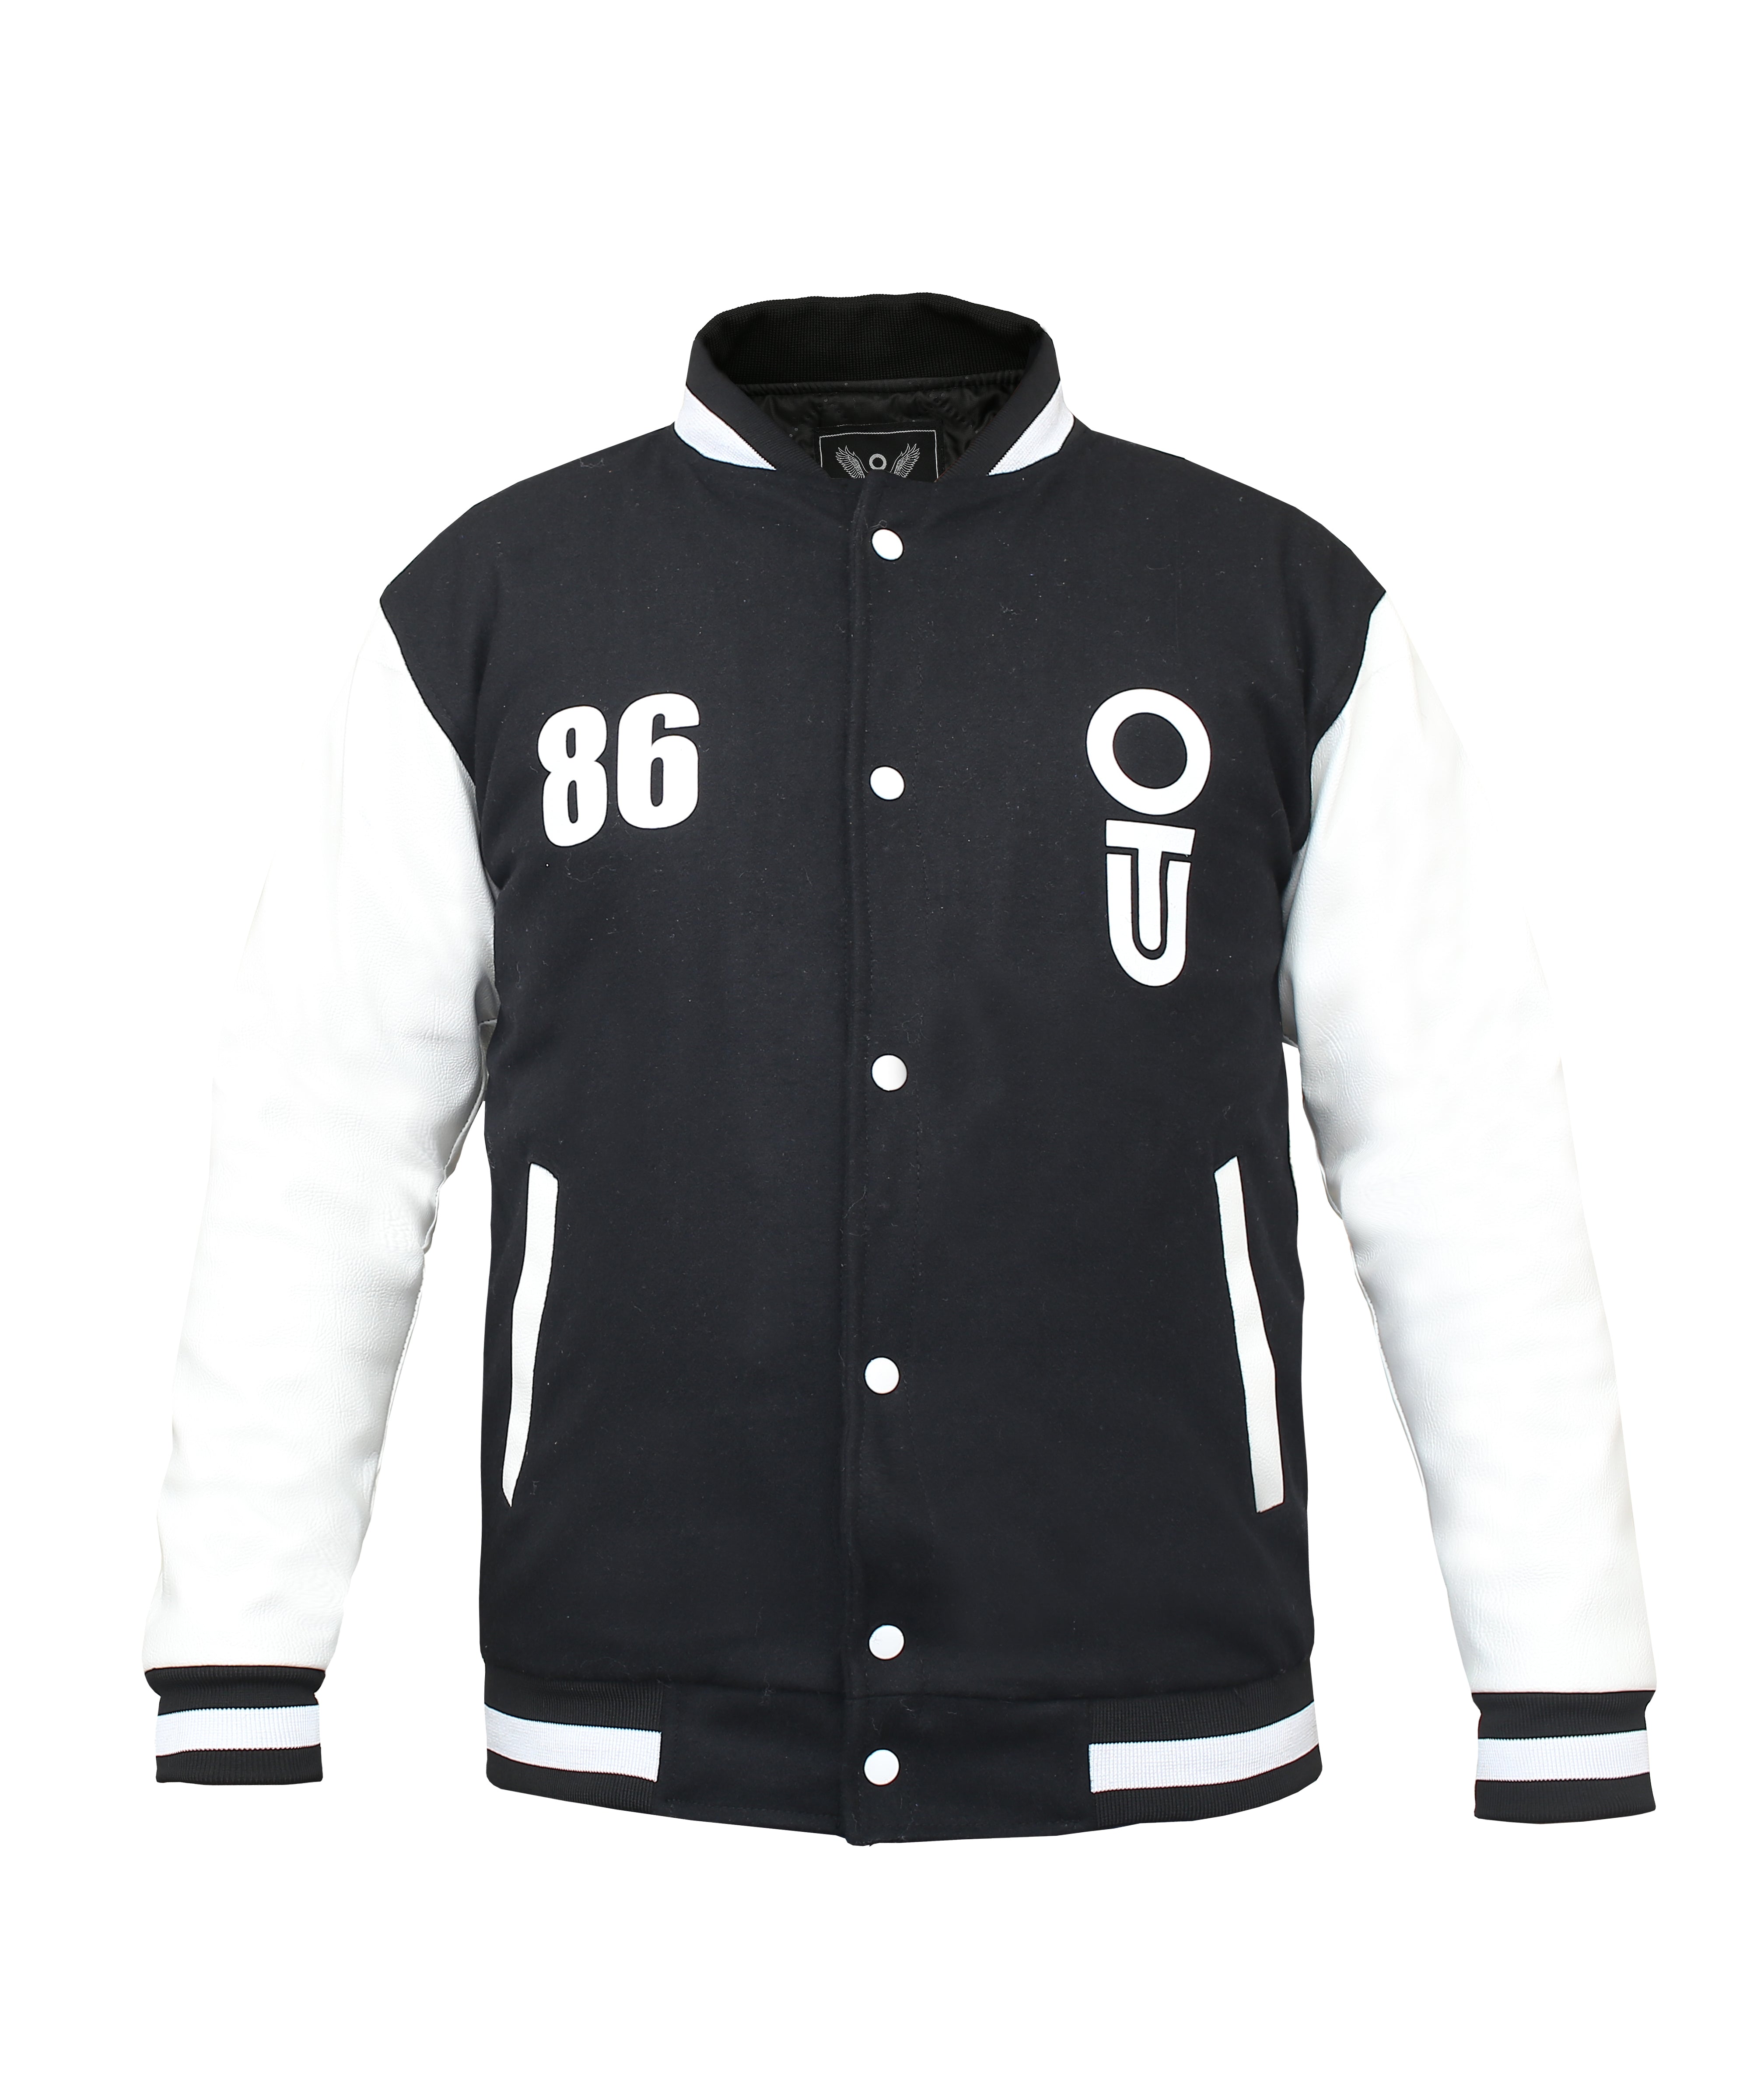 Outters Mens Fashion Varsity Jacket Causal Slim Fit Cotton Bomber Jackets